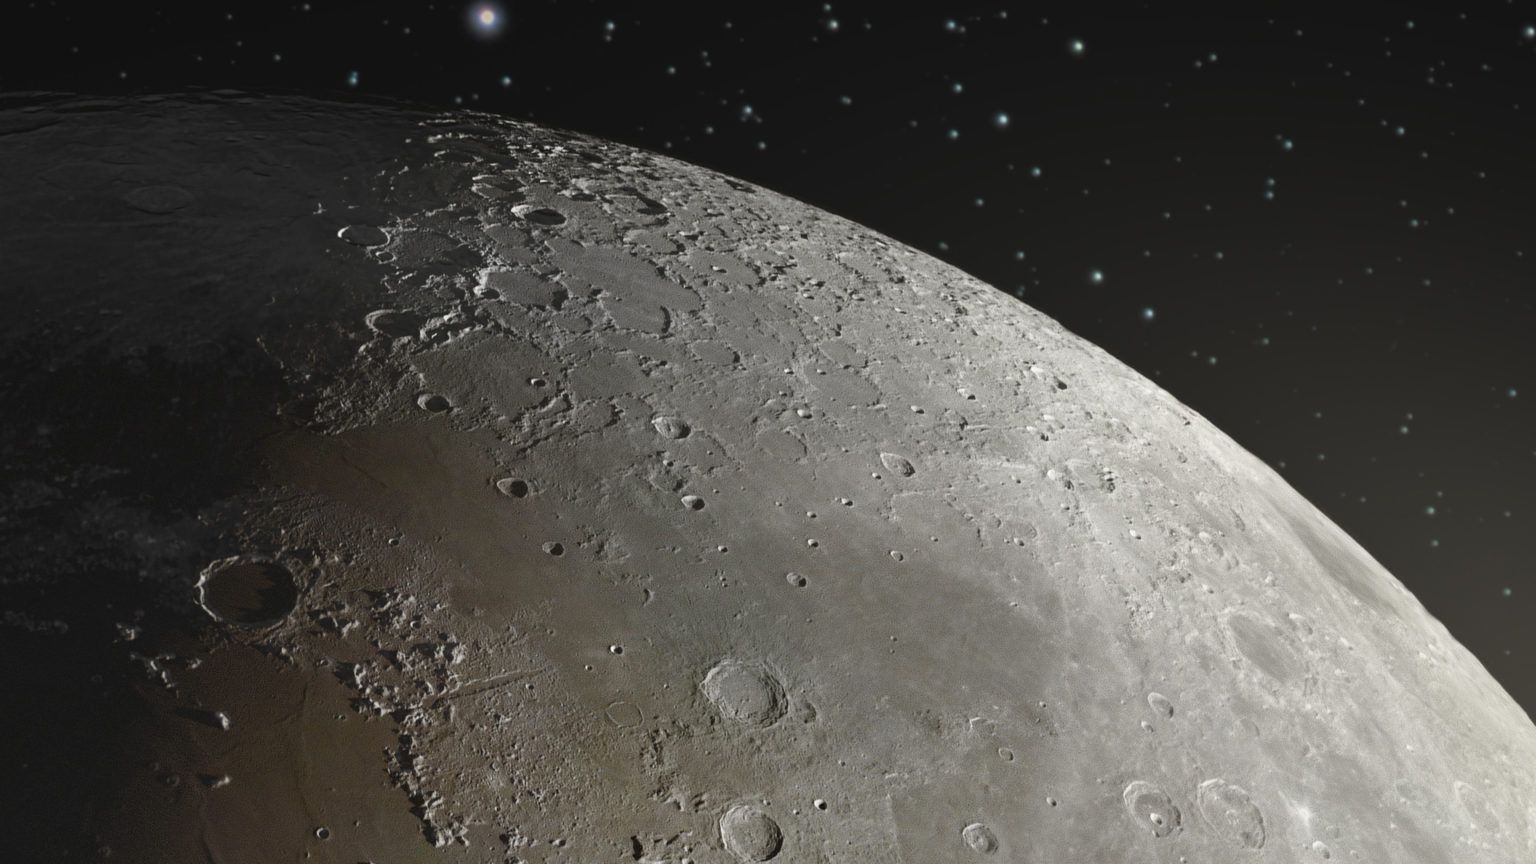 high definition close-up view of the moon's surface